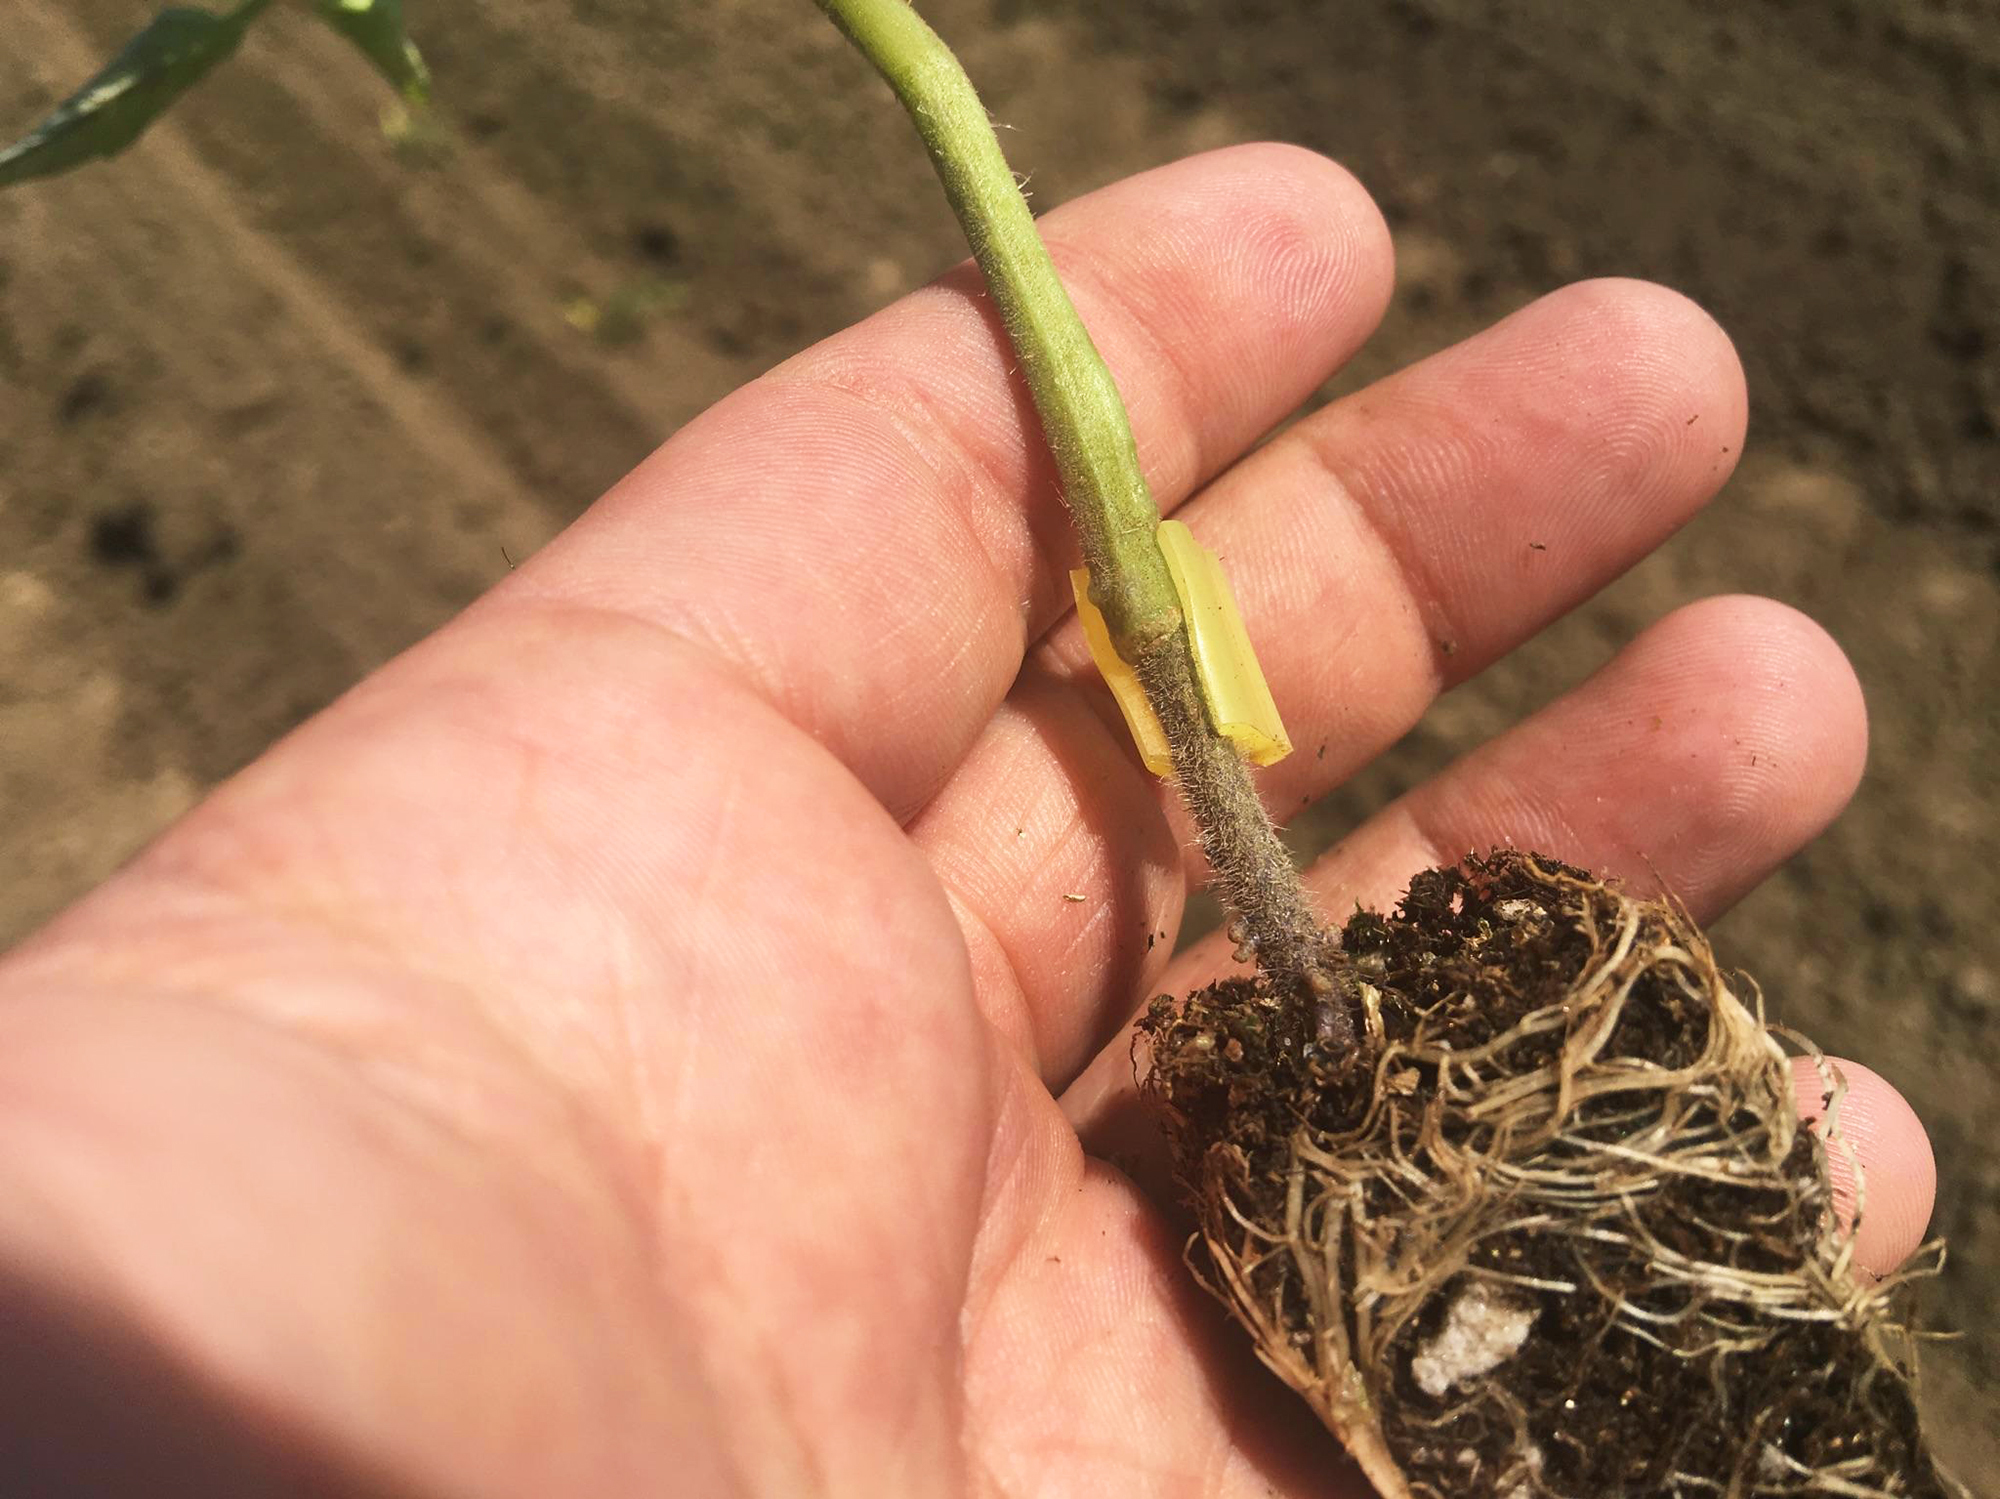 Scott Stoddard hopes that each of these little tomato plants will yield enough to make up the cost difference of grafting.